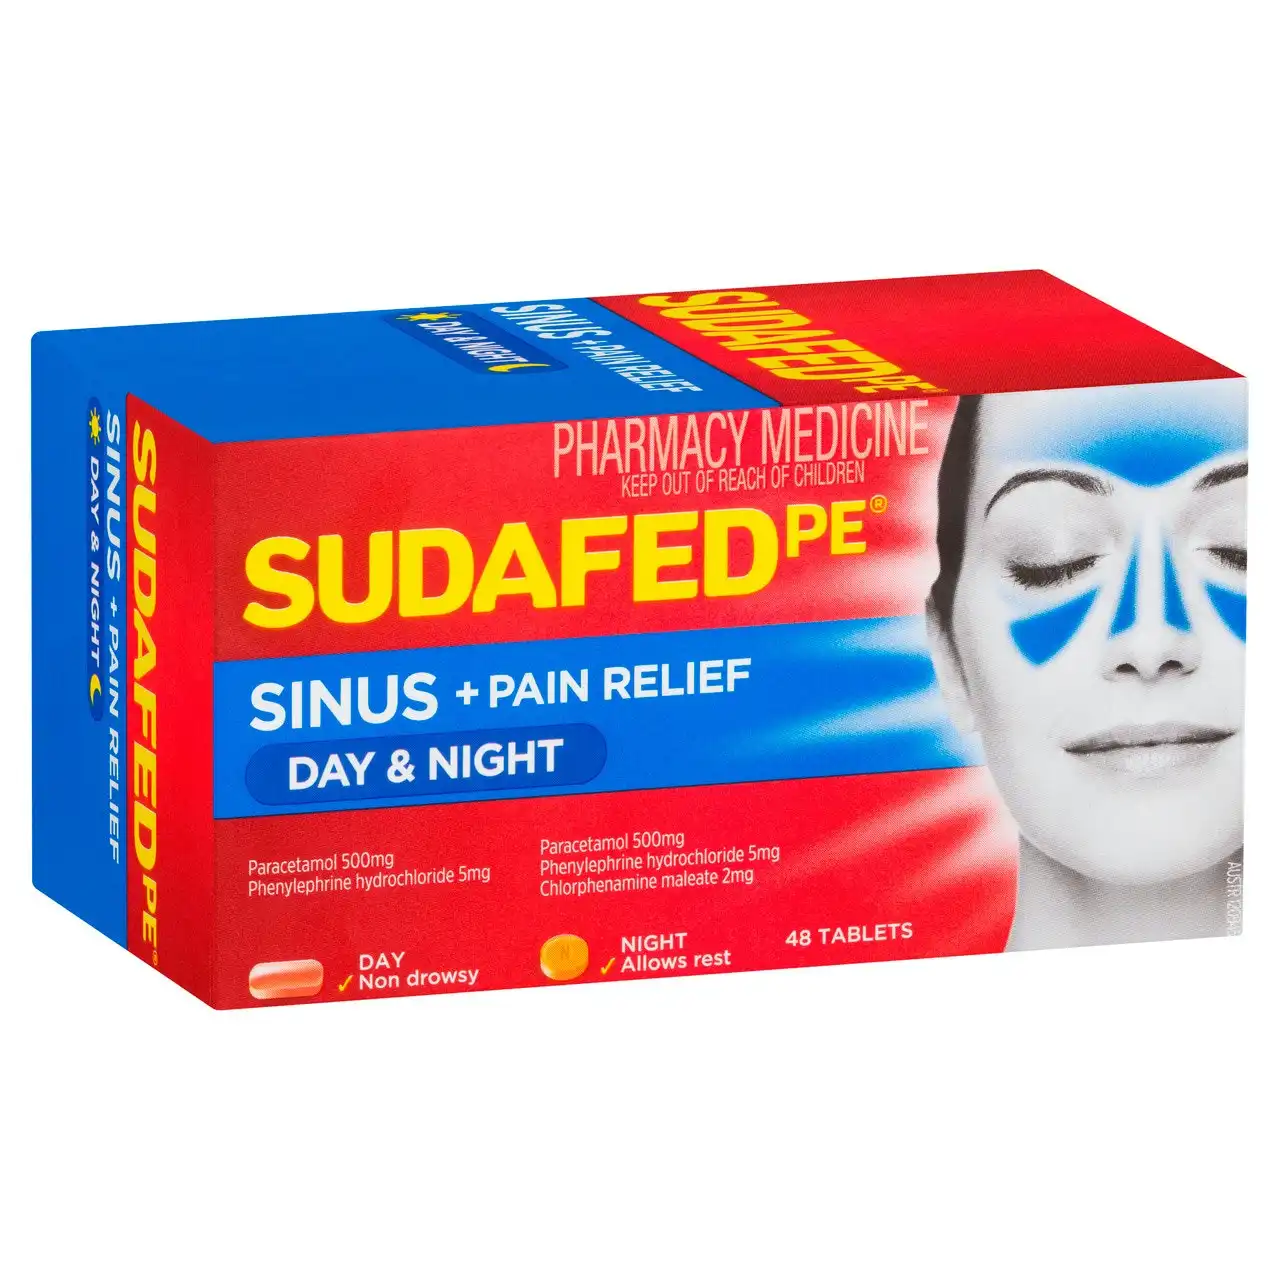 SUDAFED PE Sinus + Pain Relief Day & Night Tablets 48 Pack